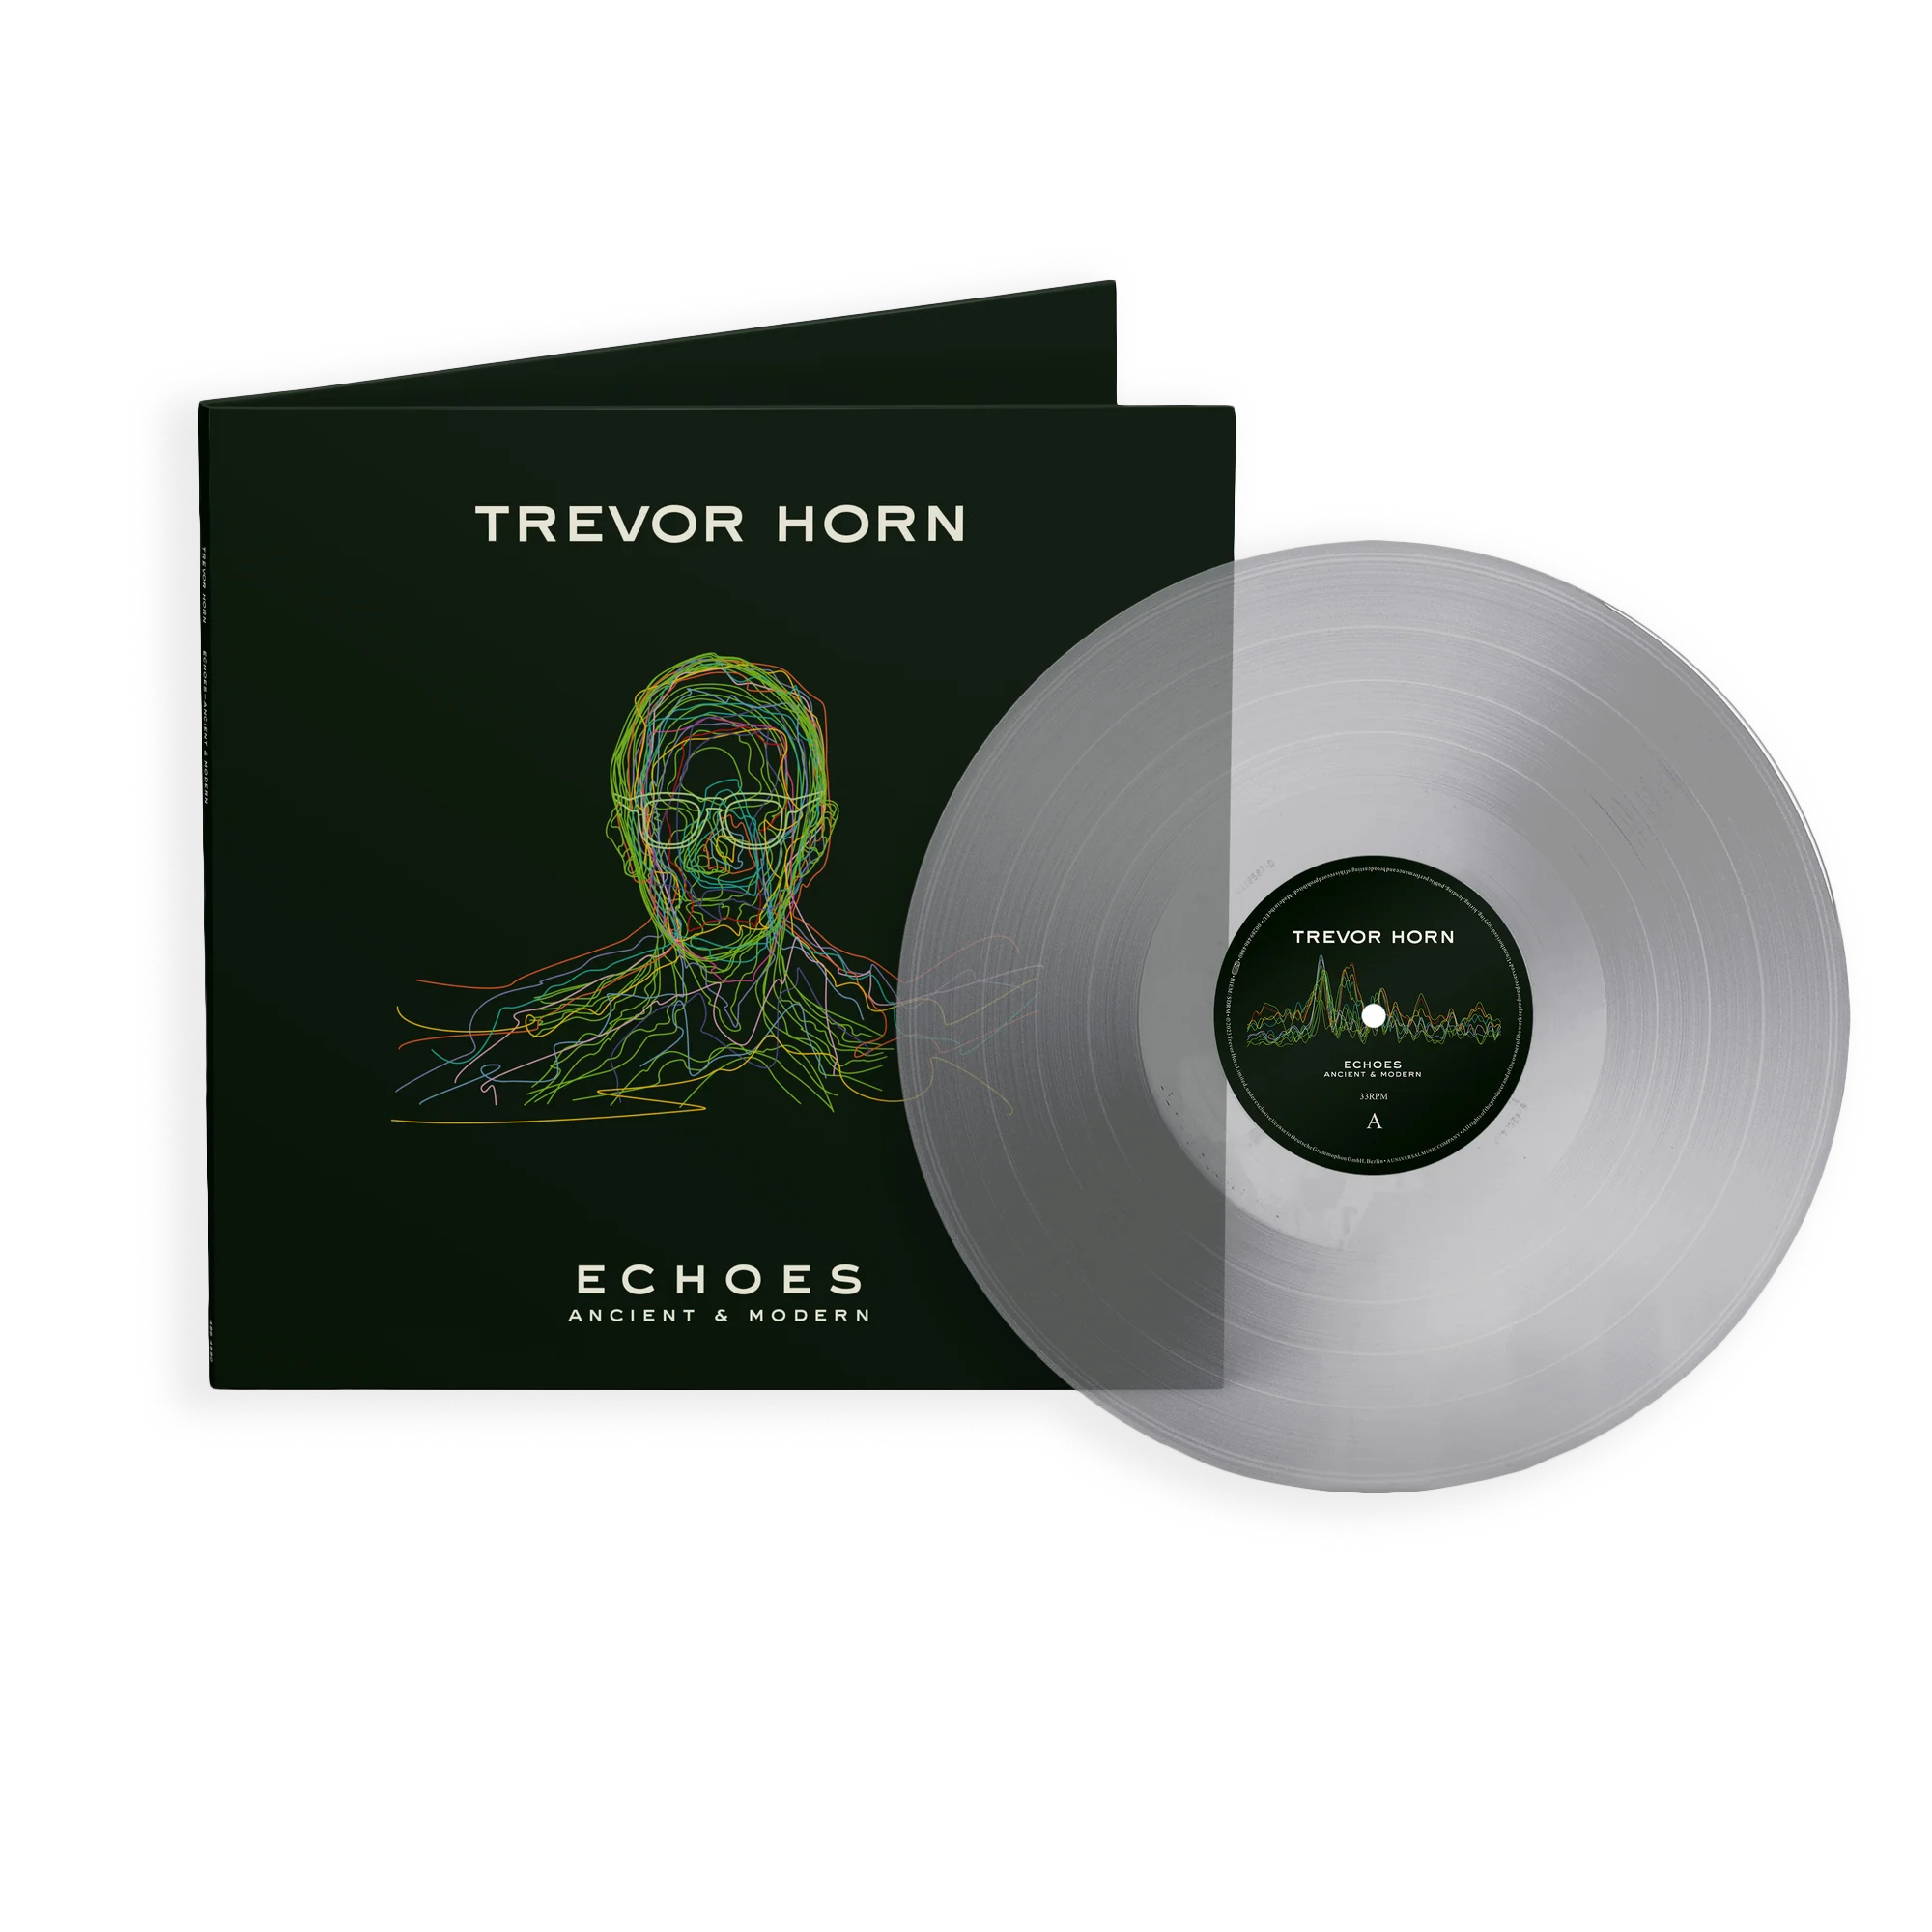 Echoes - Ancient & Modern: Exclusive Clear Vinyl LP & Print Signed By Trevor Horn & Tori Amos